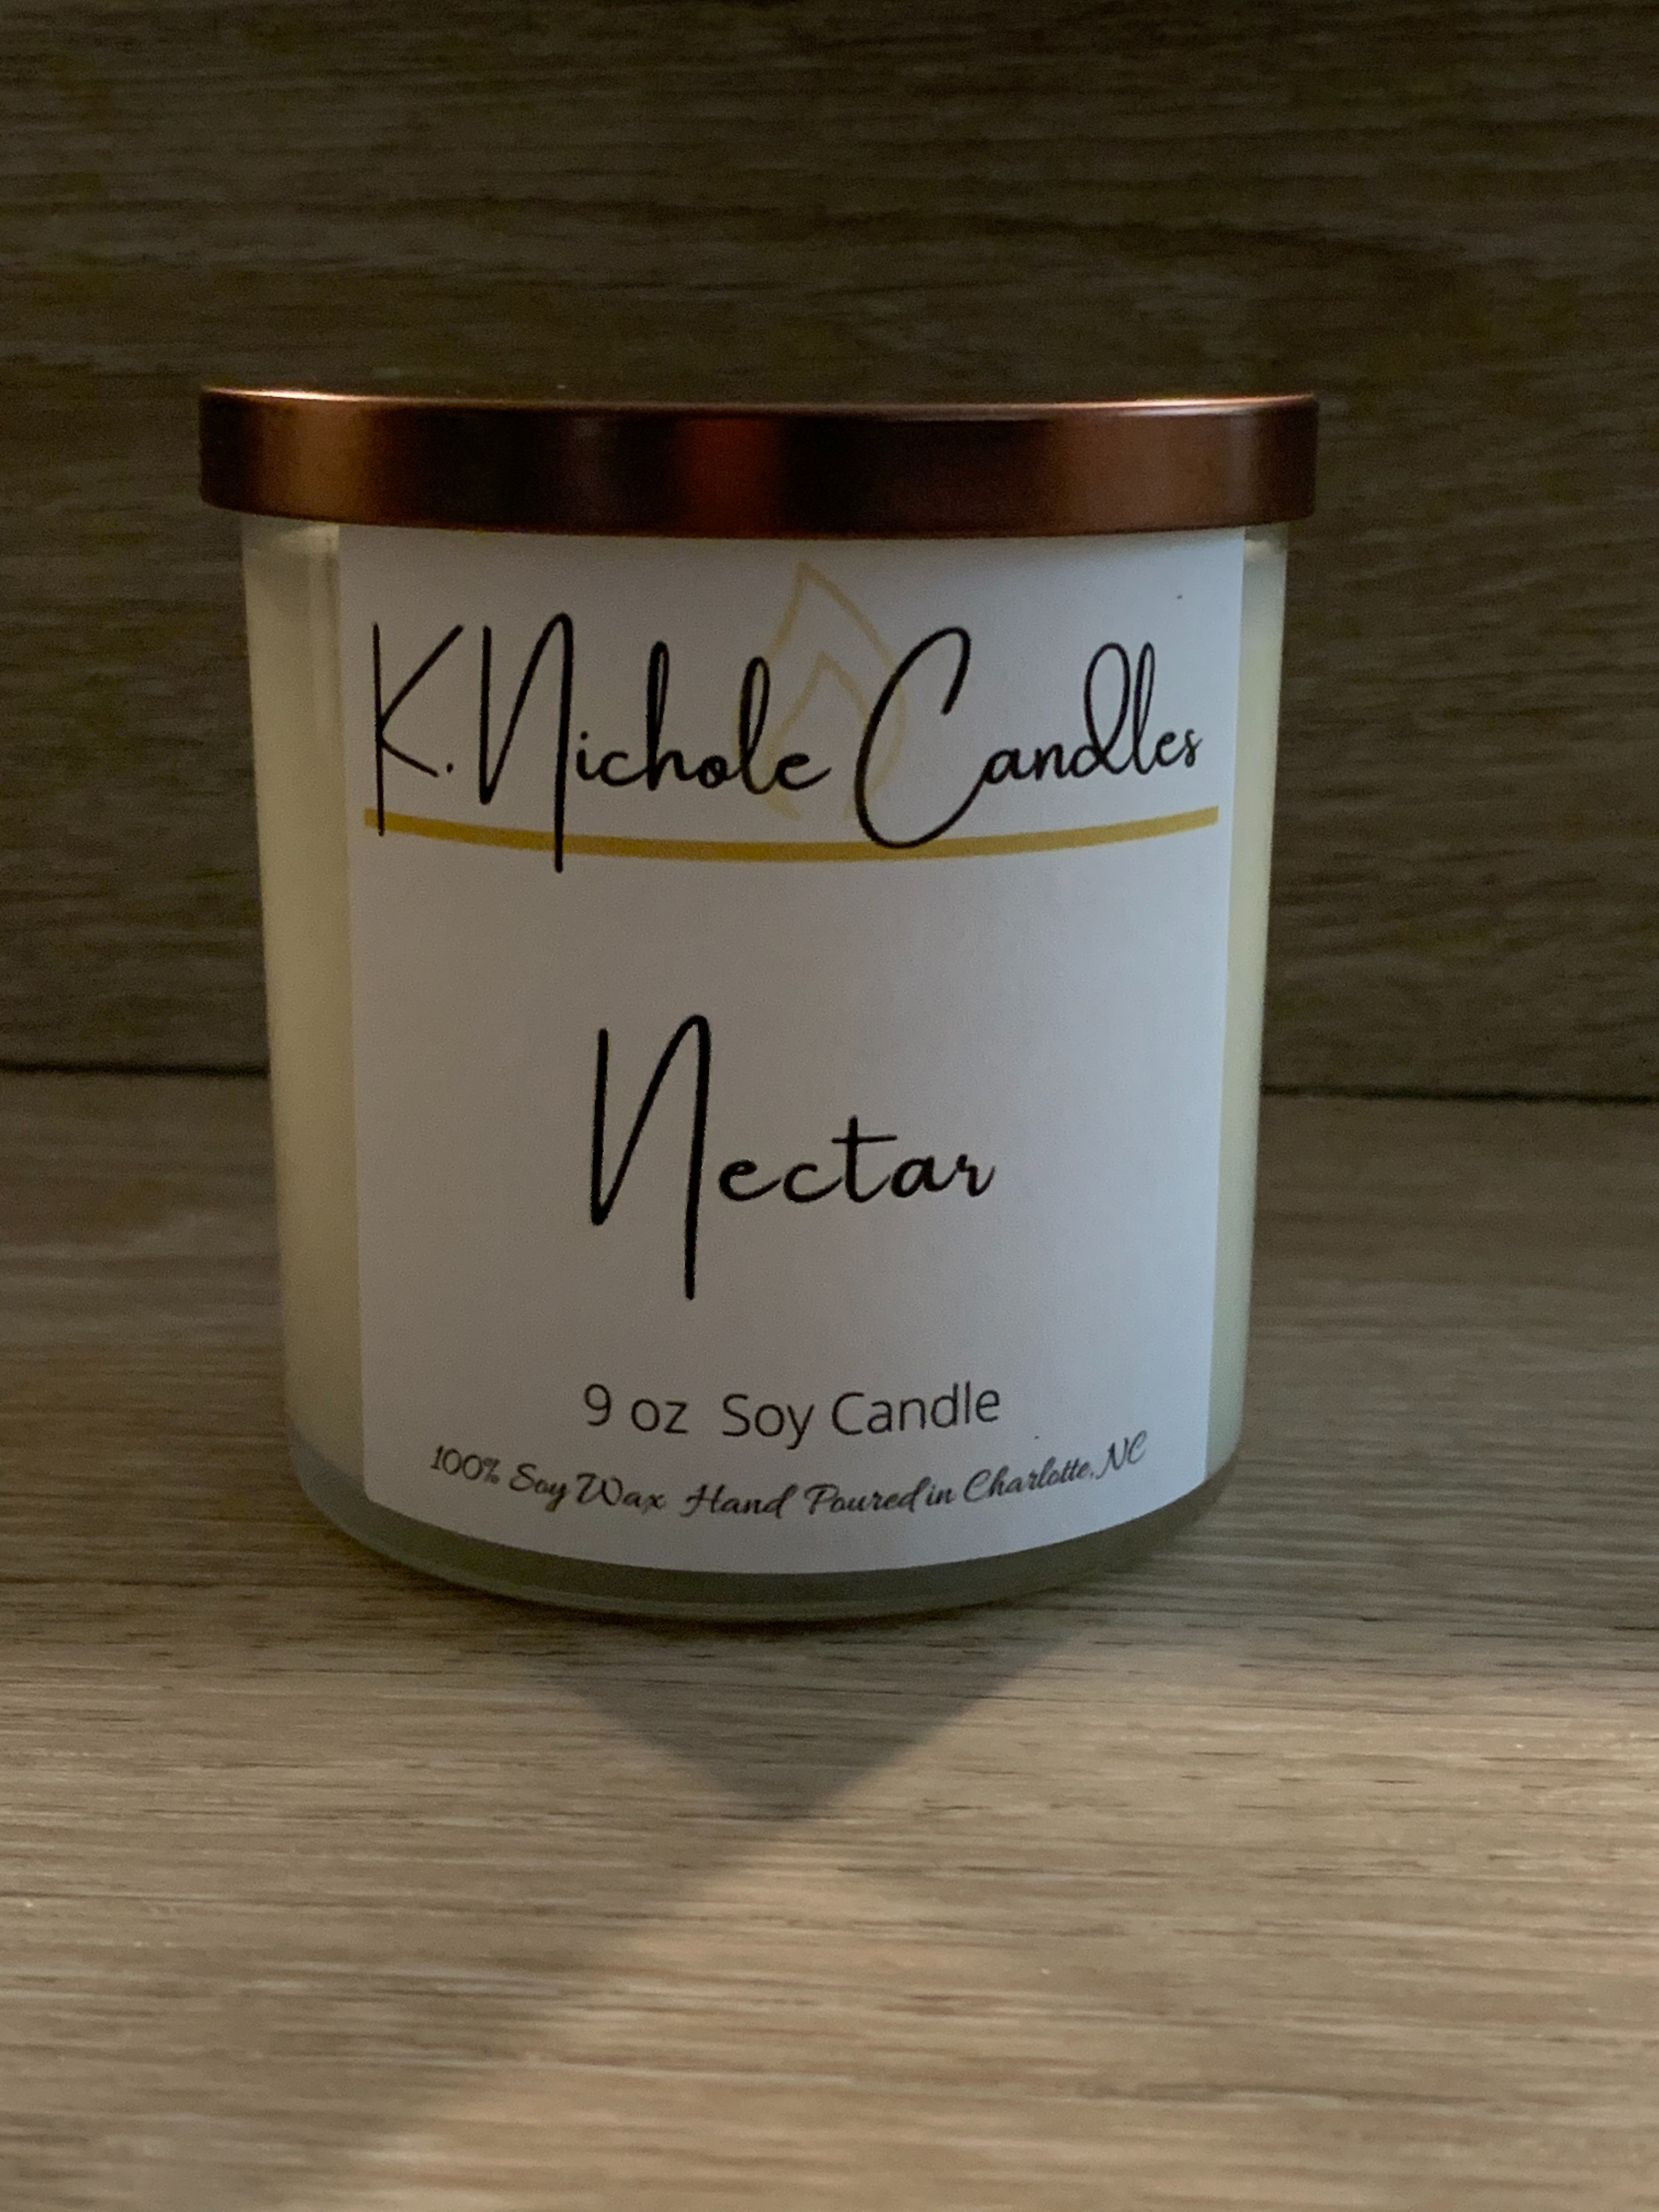 Nectar Candle